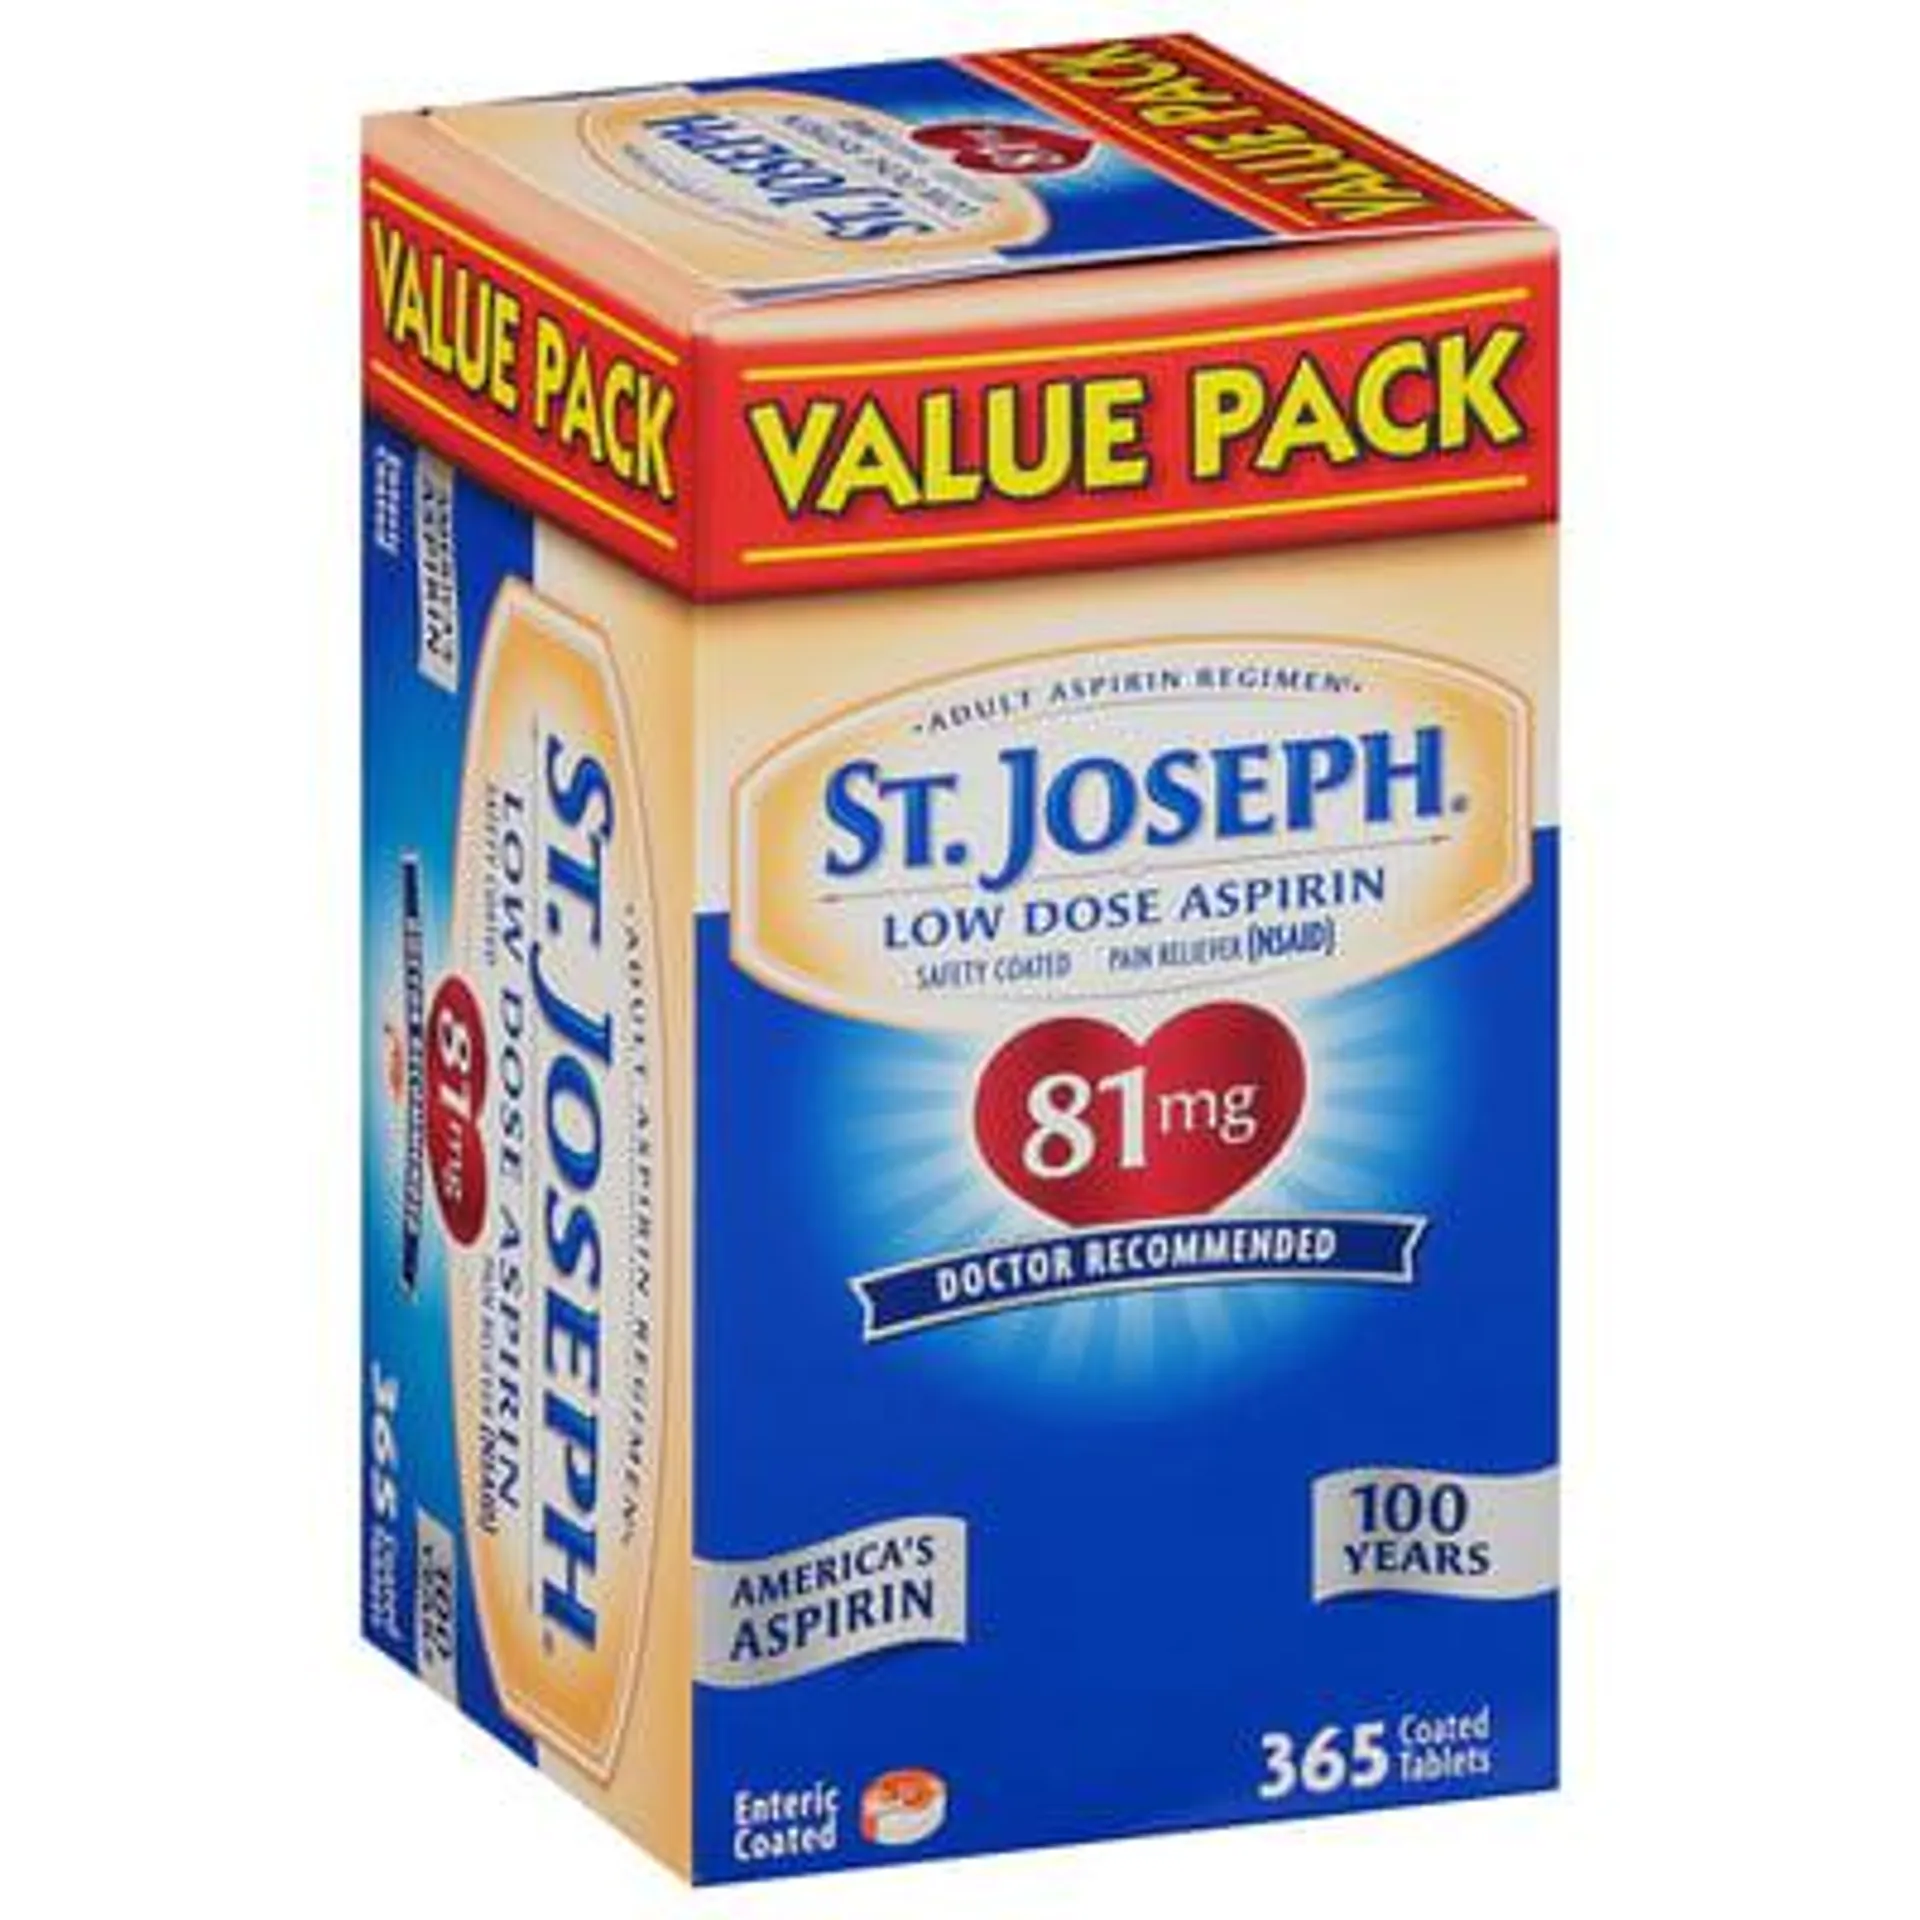 St. Joseph, Aspirin, Low Dose, Coated, 81 mg, Tablets, Value Pack